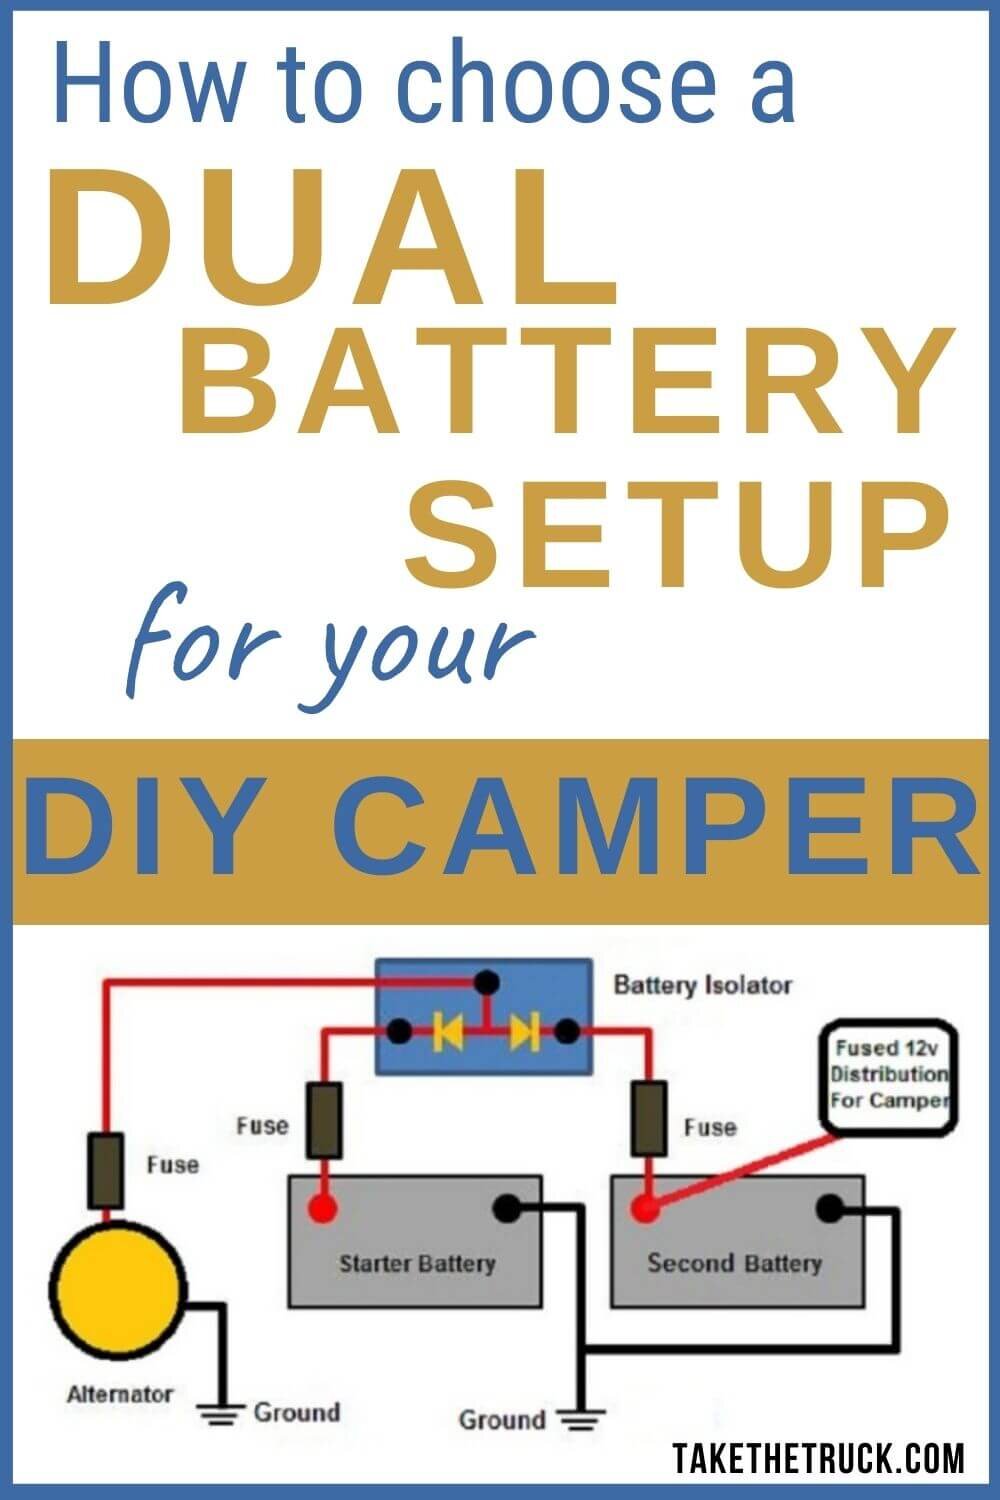 A dual battery setup provides a reliable way to meet your electrical needs while camping off grid. Select the right dual battery system for your next camping or overland travel adventure.